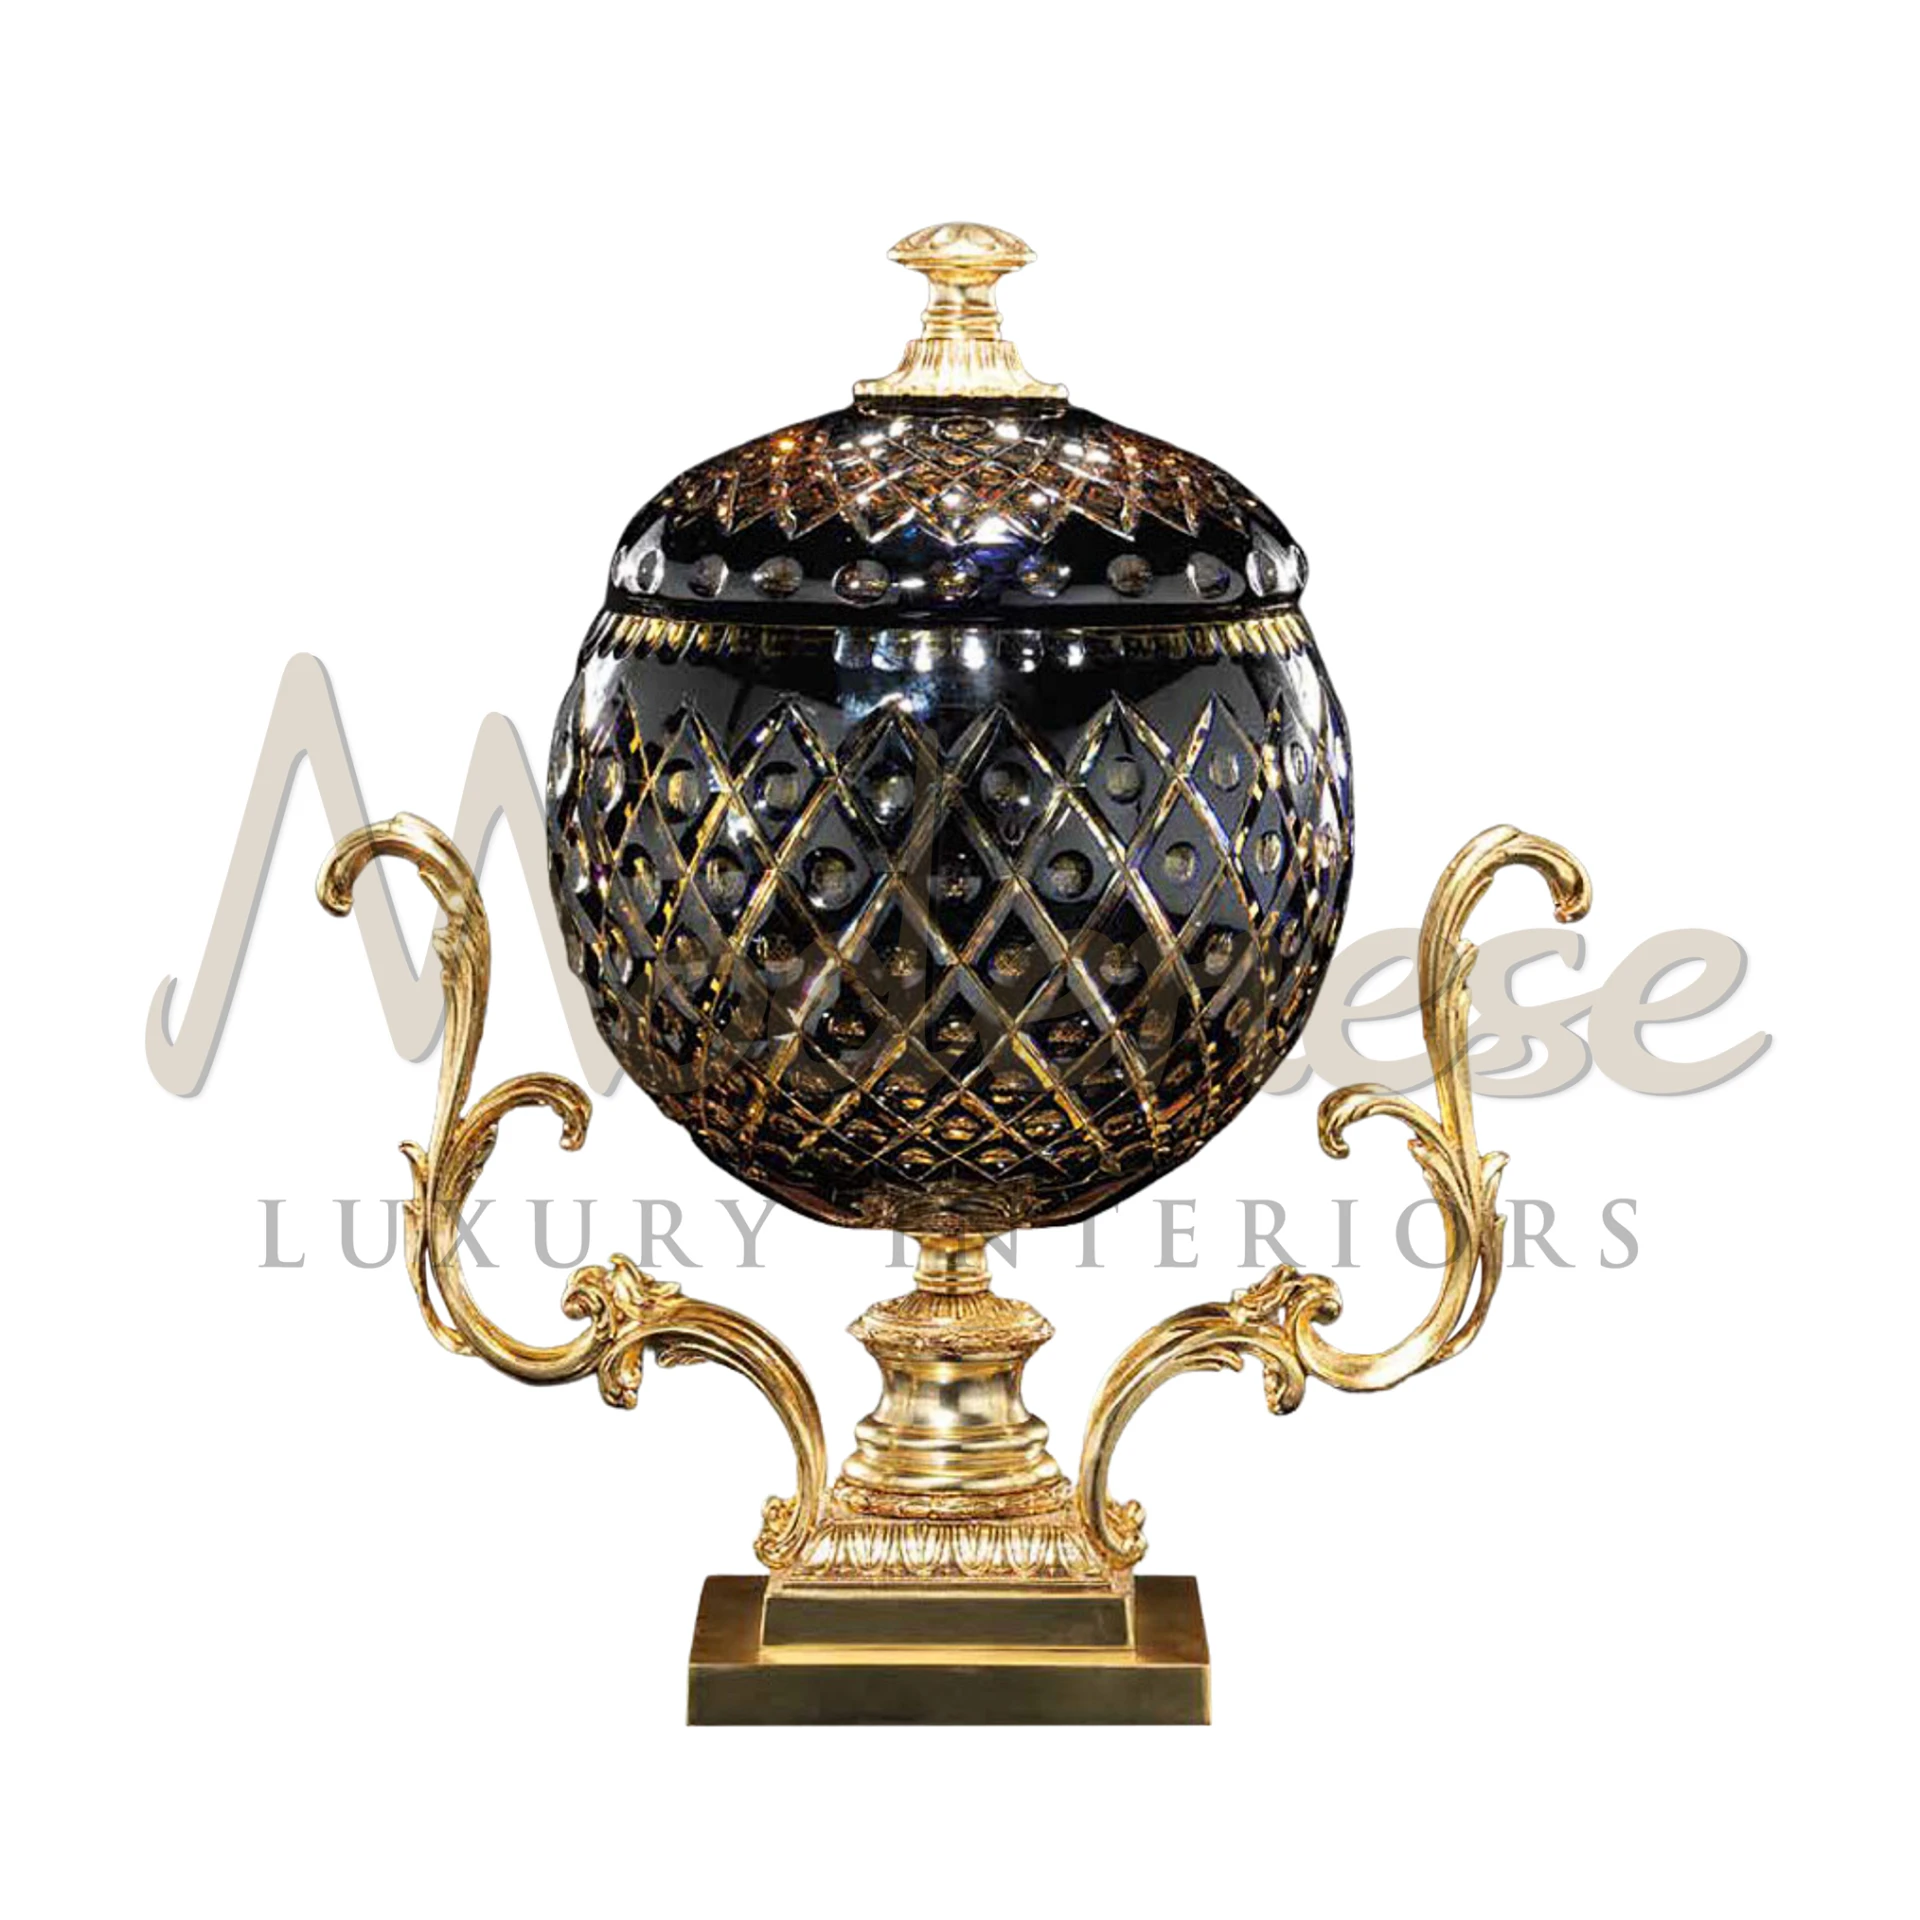 Classical Round Bowl from Modenese, crafted in Murano glass or crystal, with intricate details for a luxurious interior.